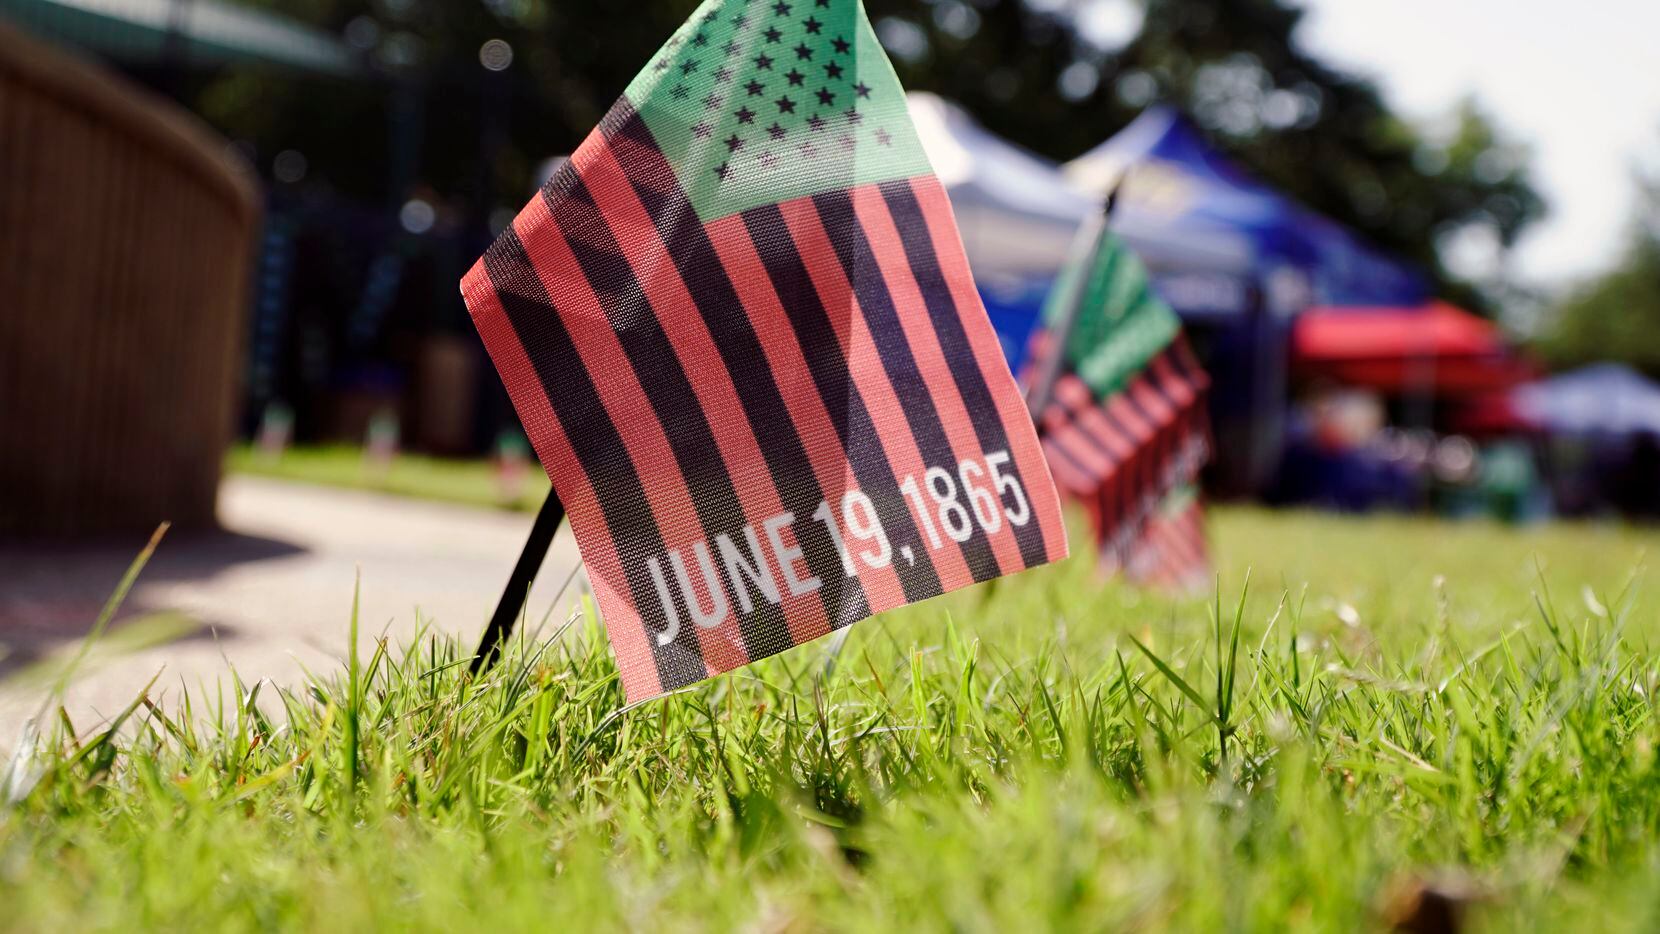 The community came out for the Dallas Juneteenth Festival at the MLK Library in Dallas,...